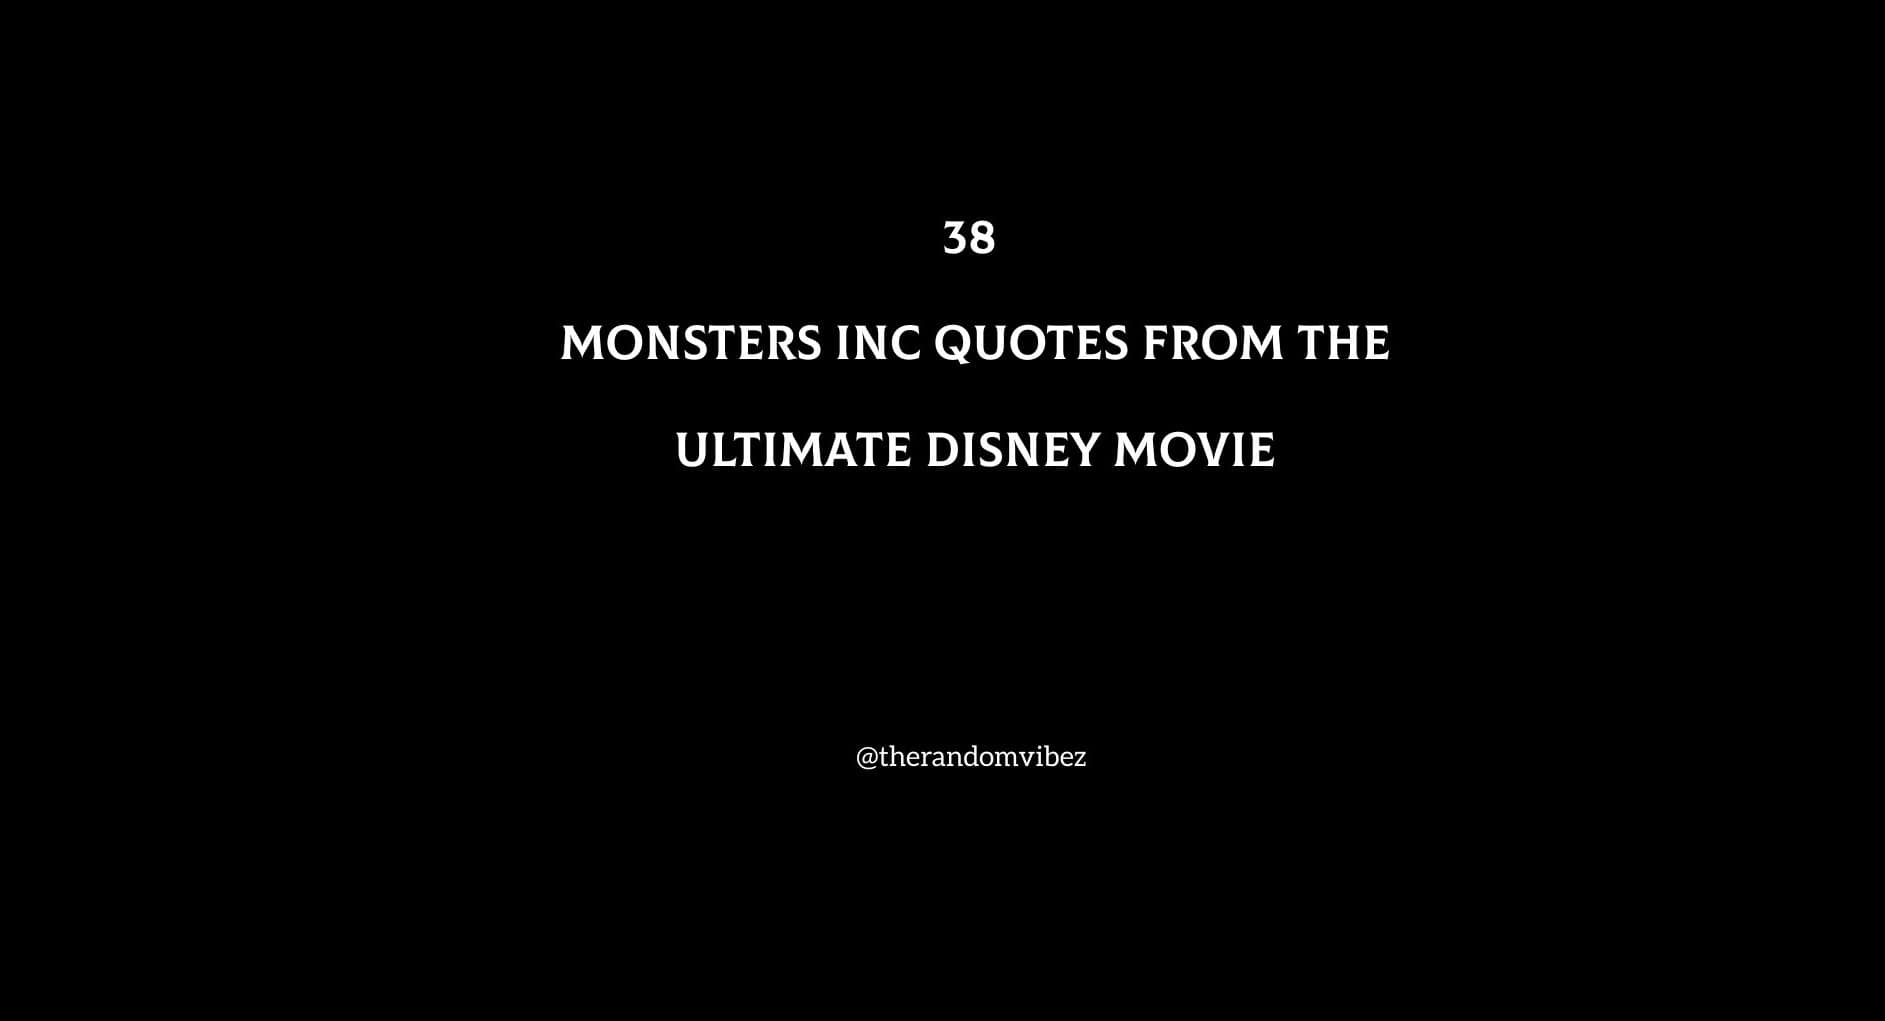 38 Monsters Inc Quotes From the Ultimate Disney Movie